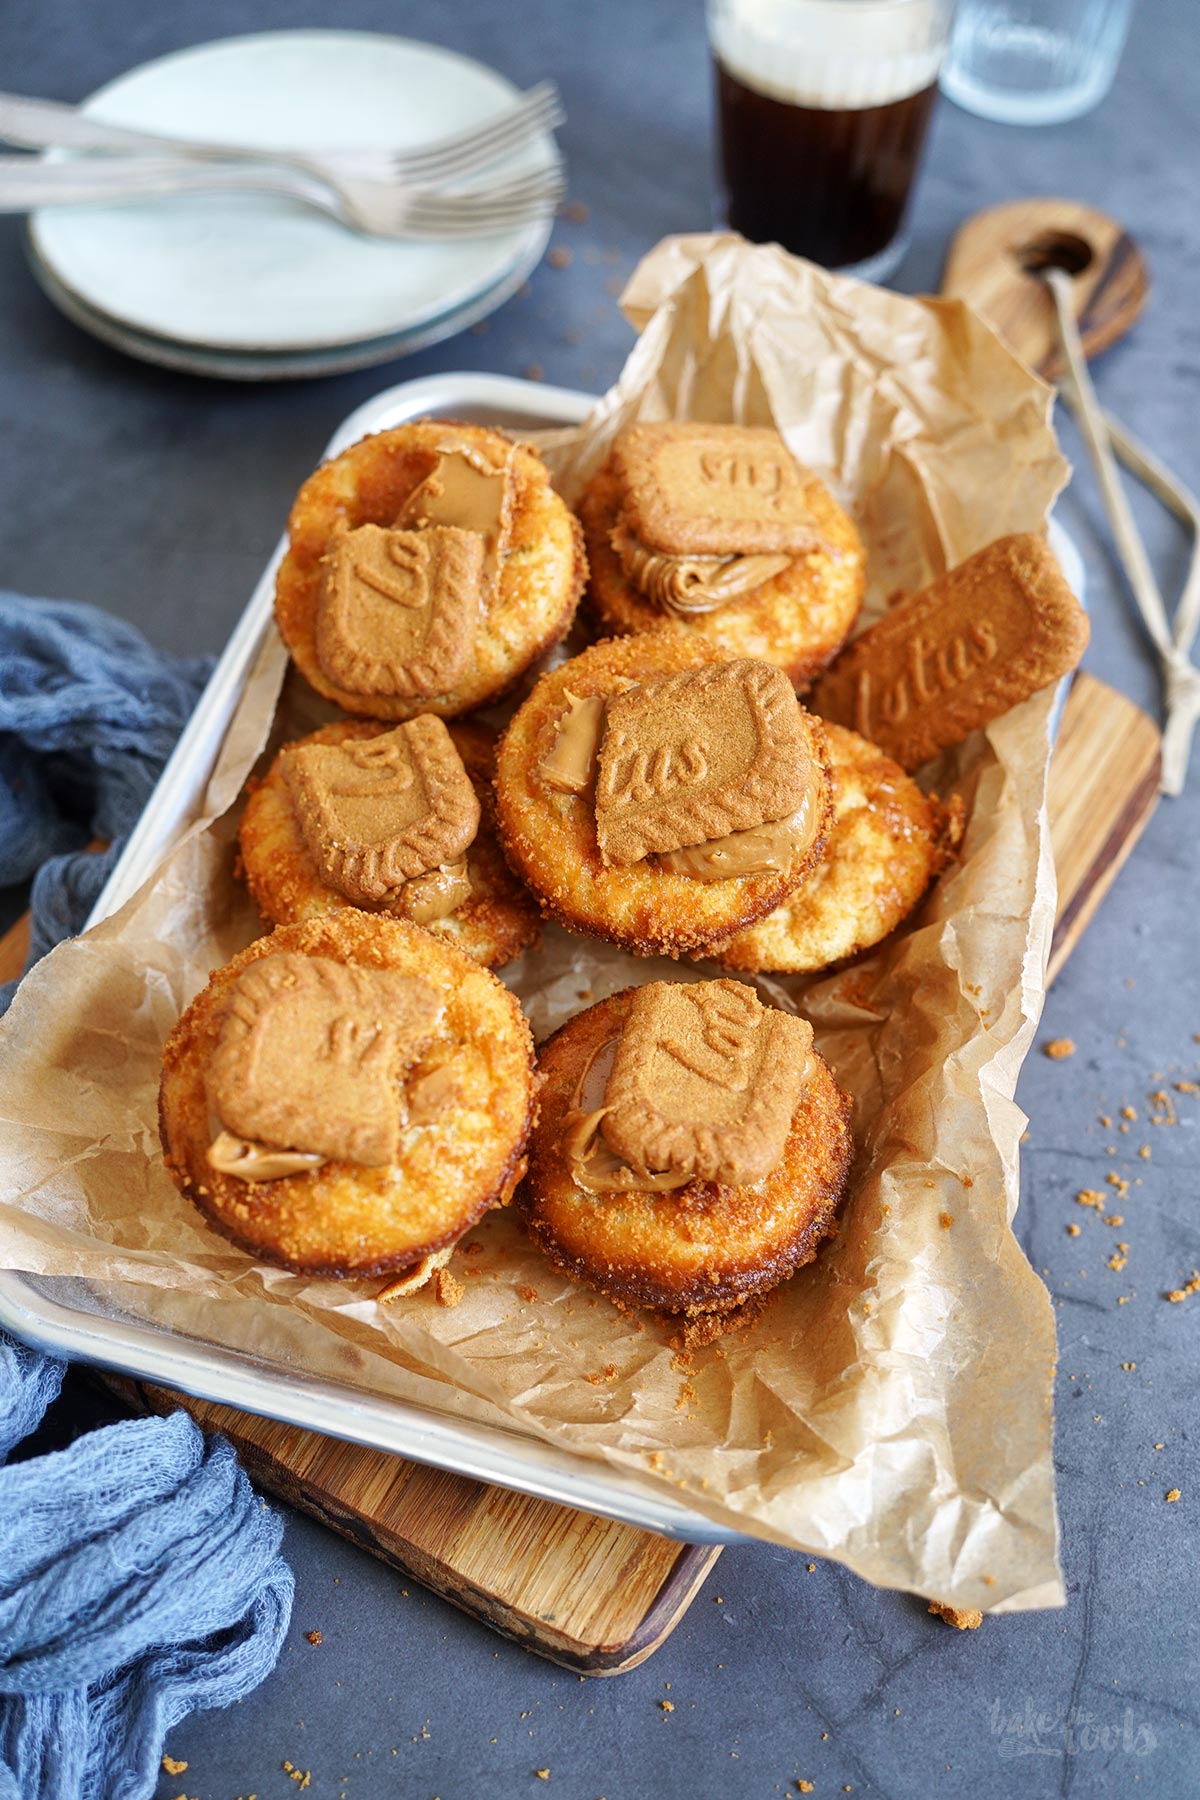 Biscoff Popovers | Bake to the roots